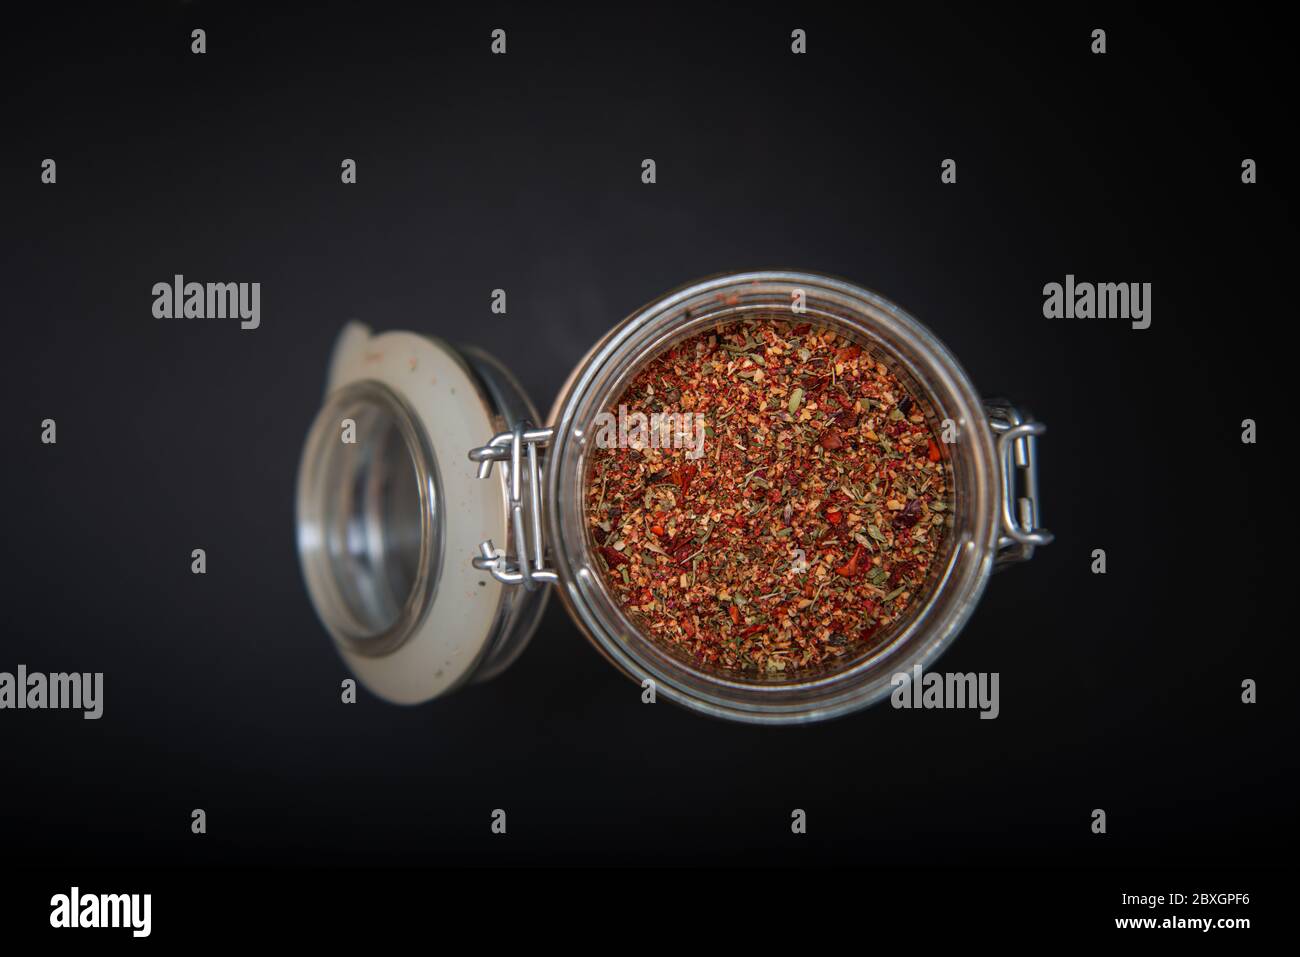 Indian spices in an open jar on a black table with copy space Stock Photo